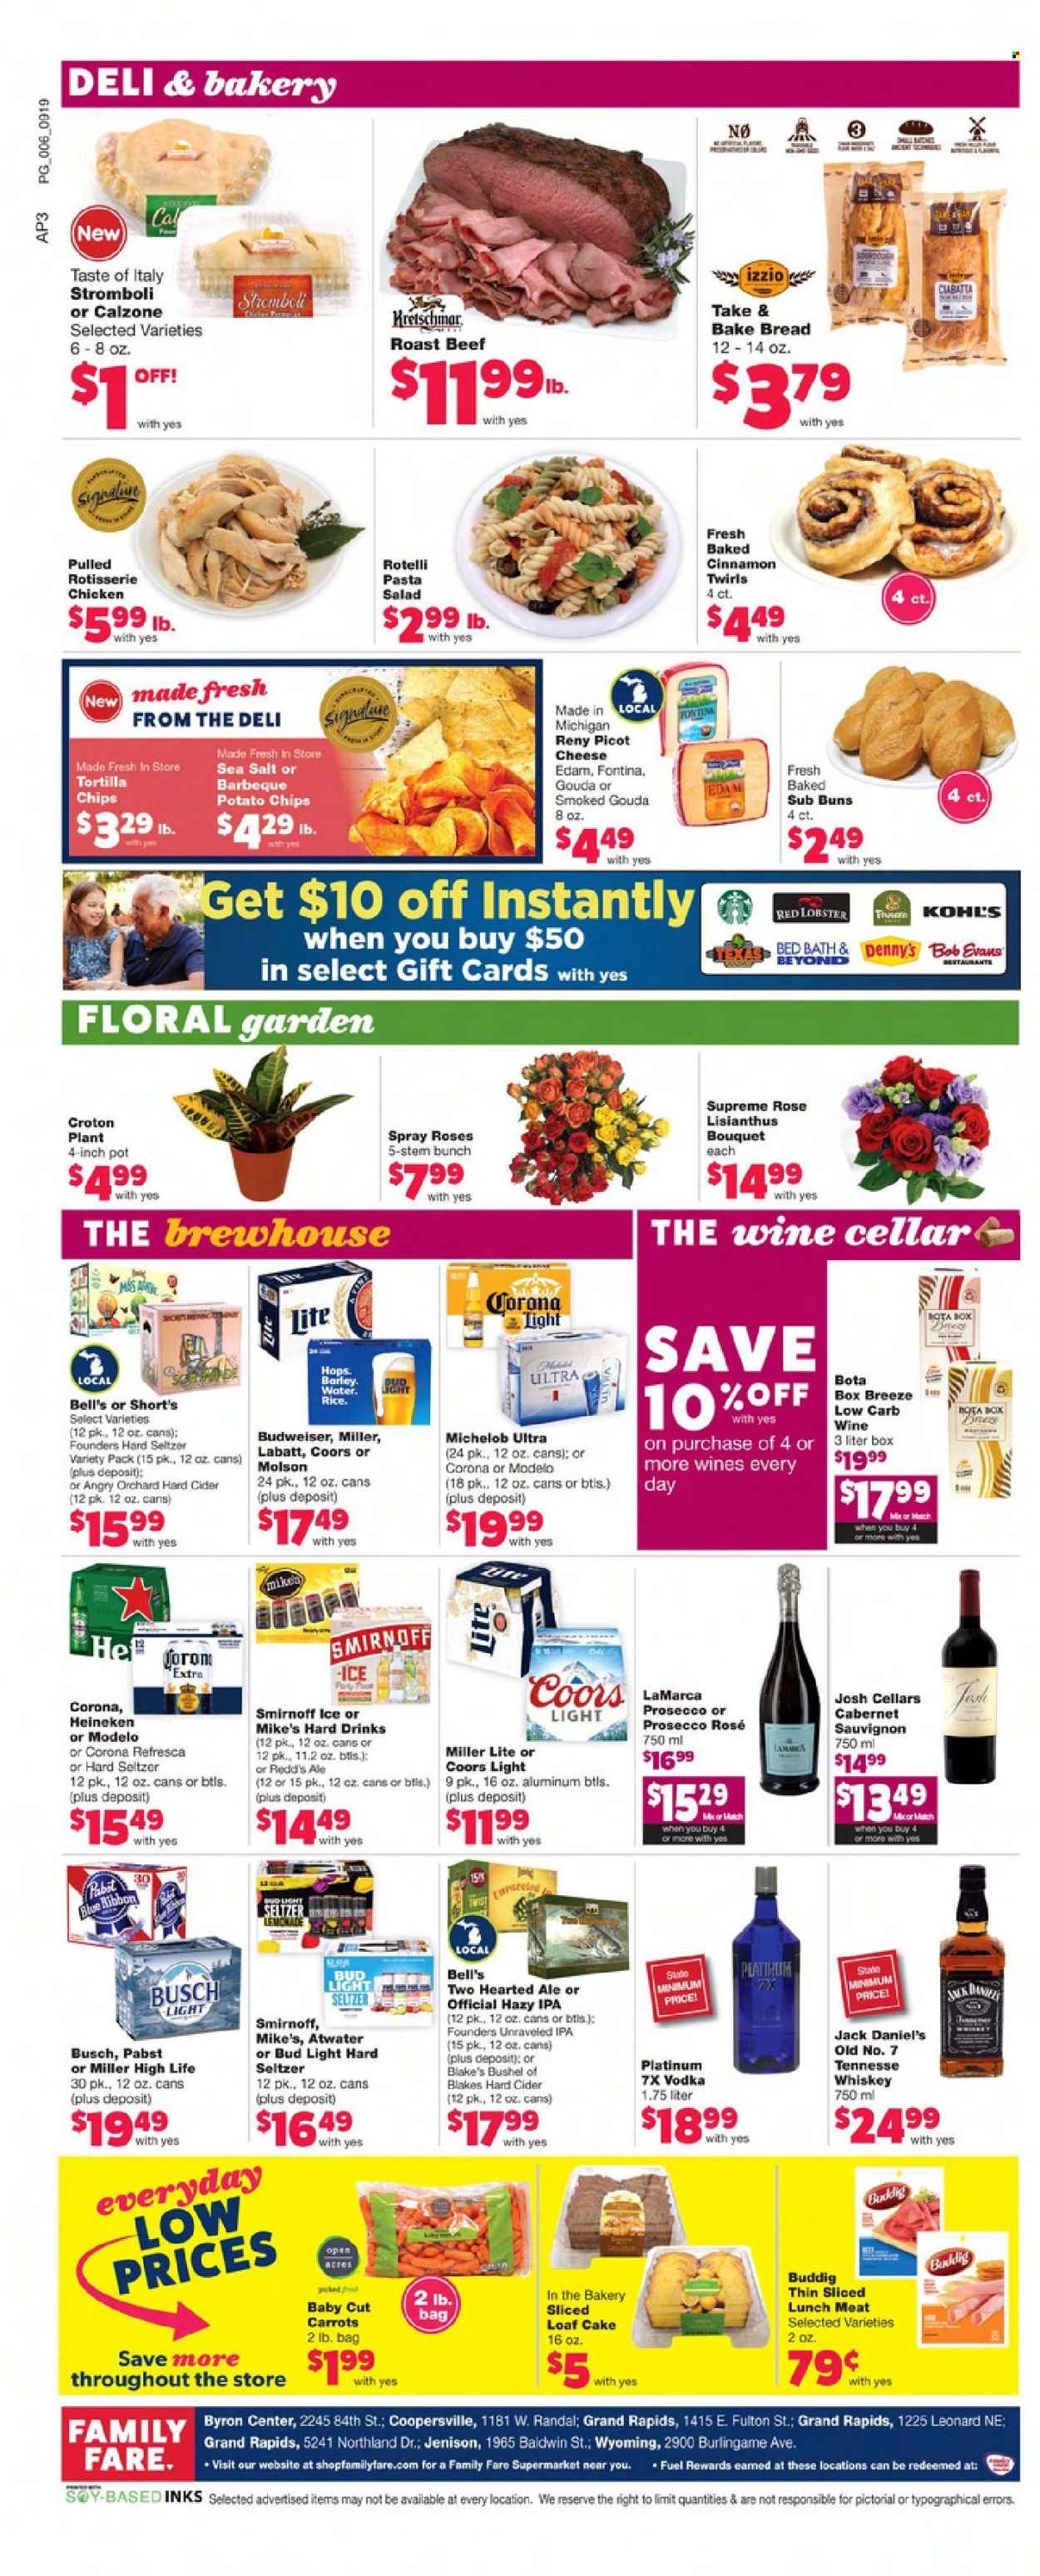 thumbnail - Family Fare Flyer - 09/19/2021 - 09/25/2021 - Sales products - bread, ciabatta, cake, buns, loaf cake, carrots, salad, lobster, Jack Daniel's, pasta, calzone, Bob Evans, pasta salad, lunch meat, edam cheese, Fontina, gouda, cheese, tortilla chips, potato chips, chips, cinnamon, lemonade, Cabernet Sauvignon, red wine, wine, rosé wine, Smirnoff, vodka, whiskey, Hard Seltzer, whisky, cider, beer, Busch, Bud Light, Corona Extra, Heineken, IPA, Modelo, Pabst Blue Ribbon, beef meat, roast beef, pot, bouquet, Budweiser, Miller Lite, Coors, Michelob. Page 6.